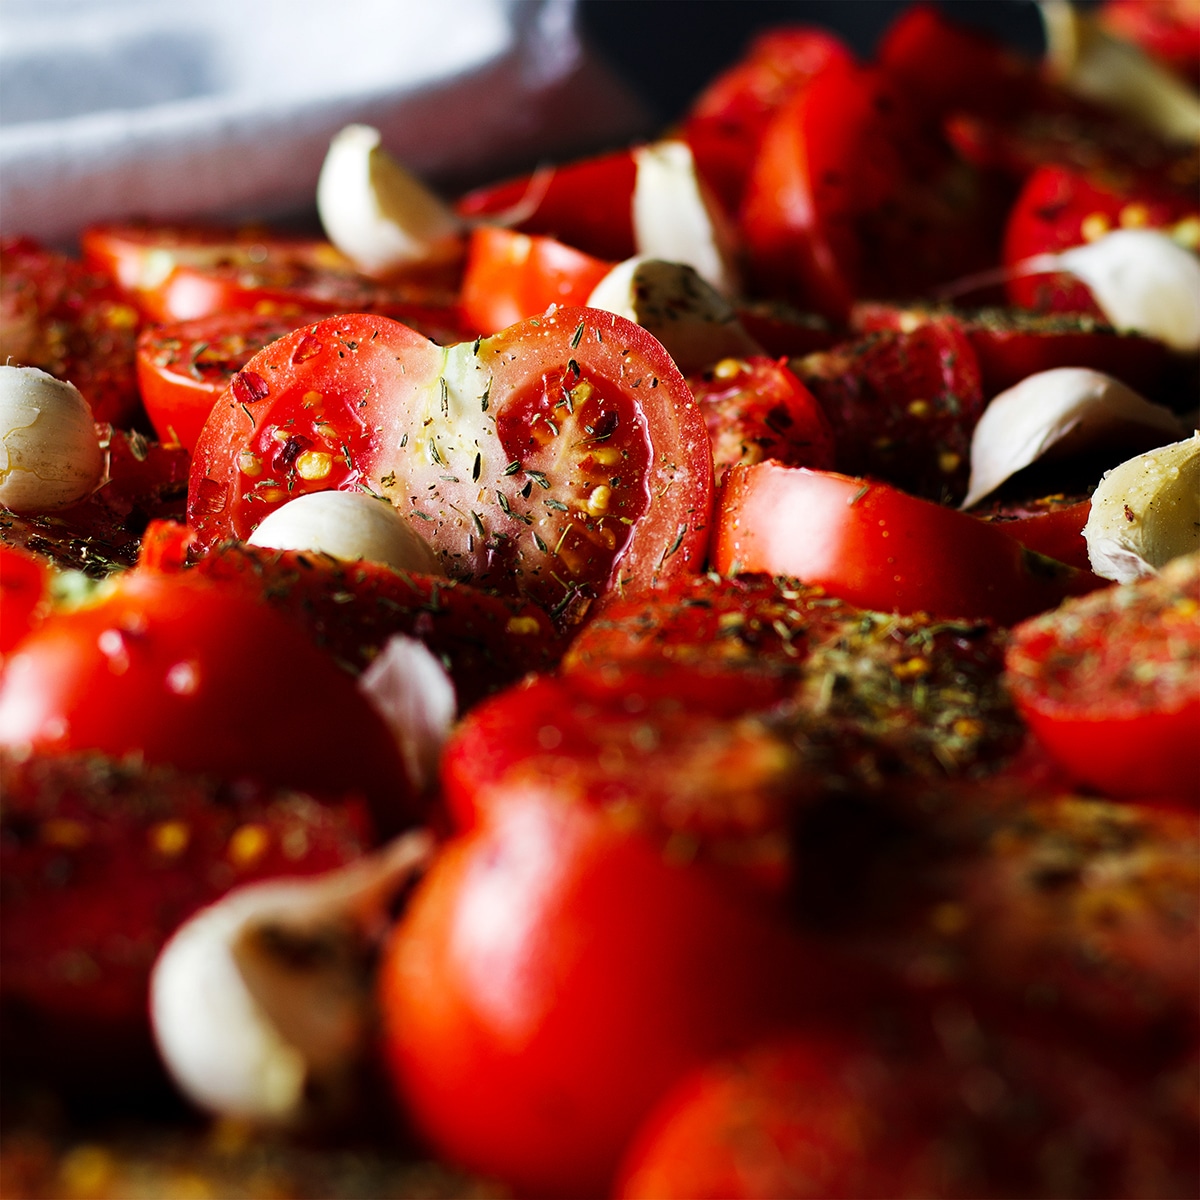 Ripe summer tomatoes that have been cut in half and spread out on a baking tray along with many cloves of garlic.